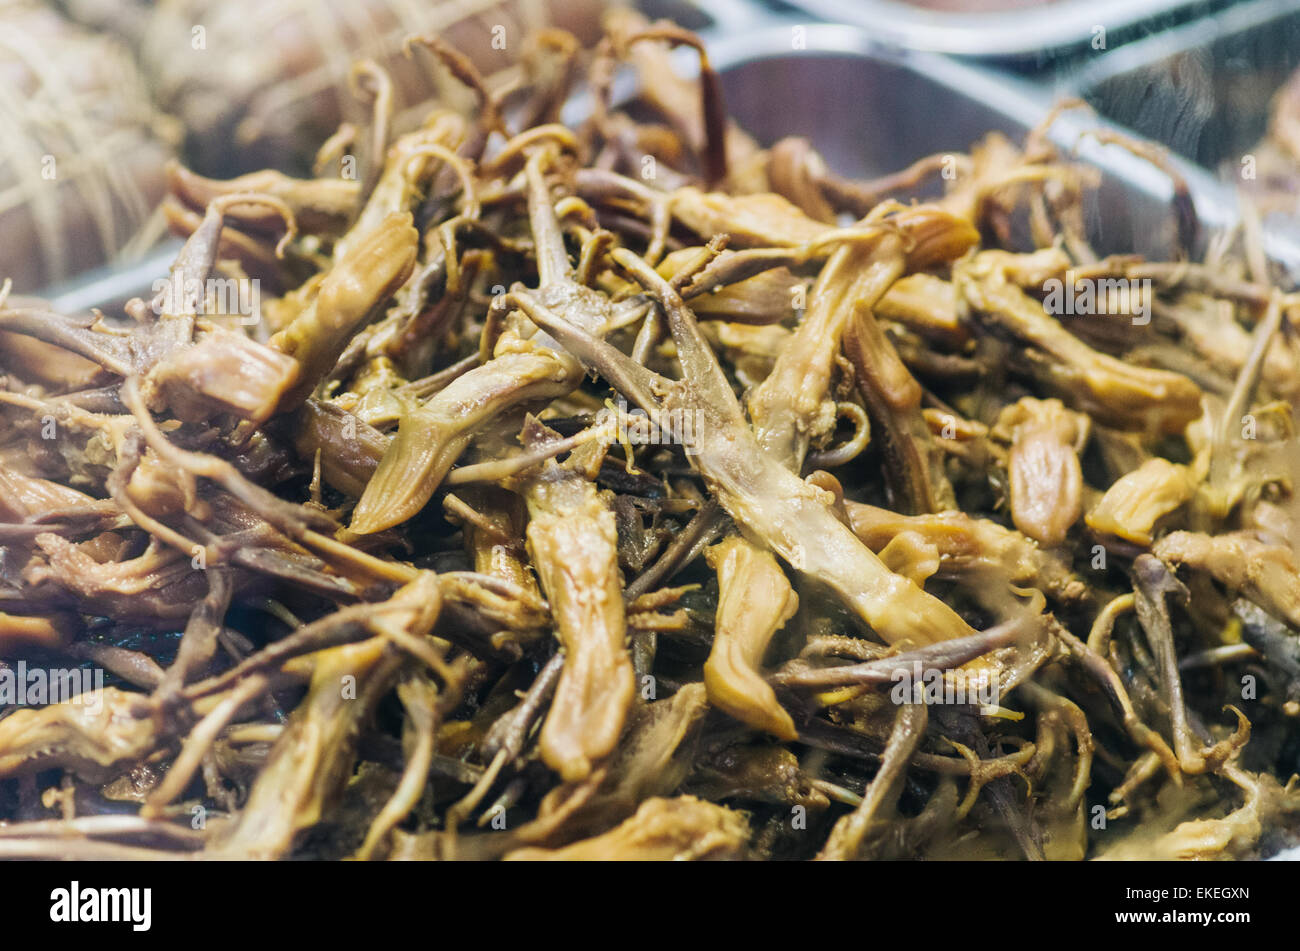 Braised duck tongues as common chinese food as snack. Stock Photo